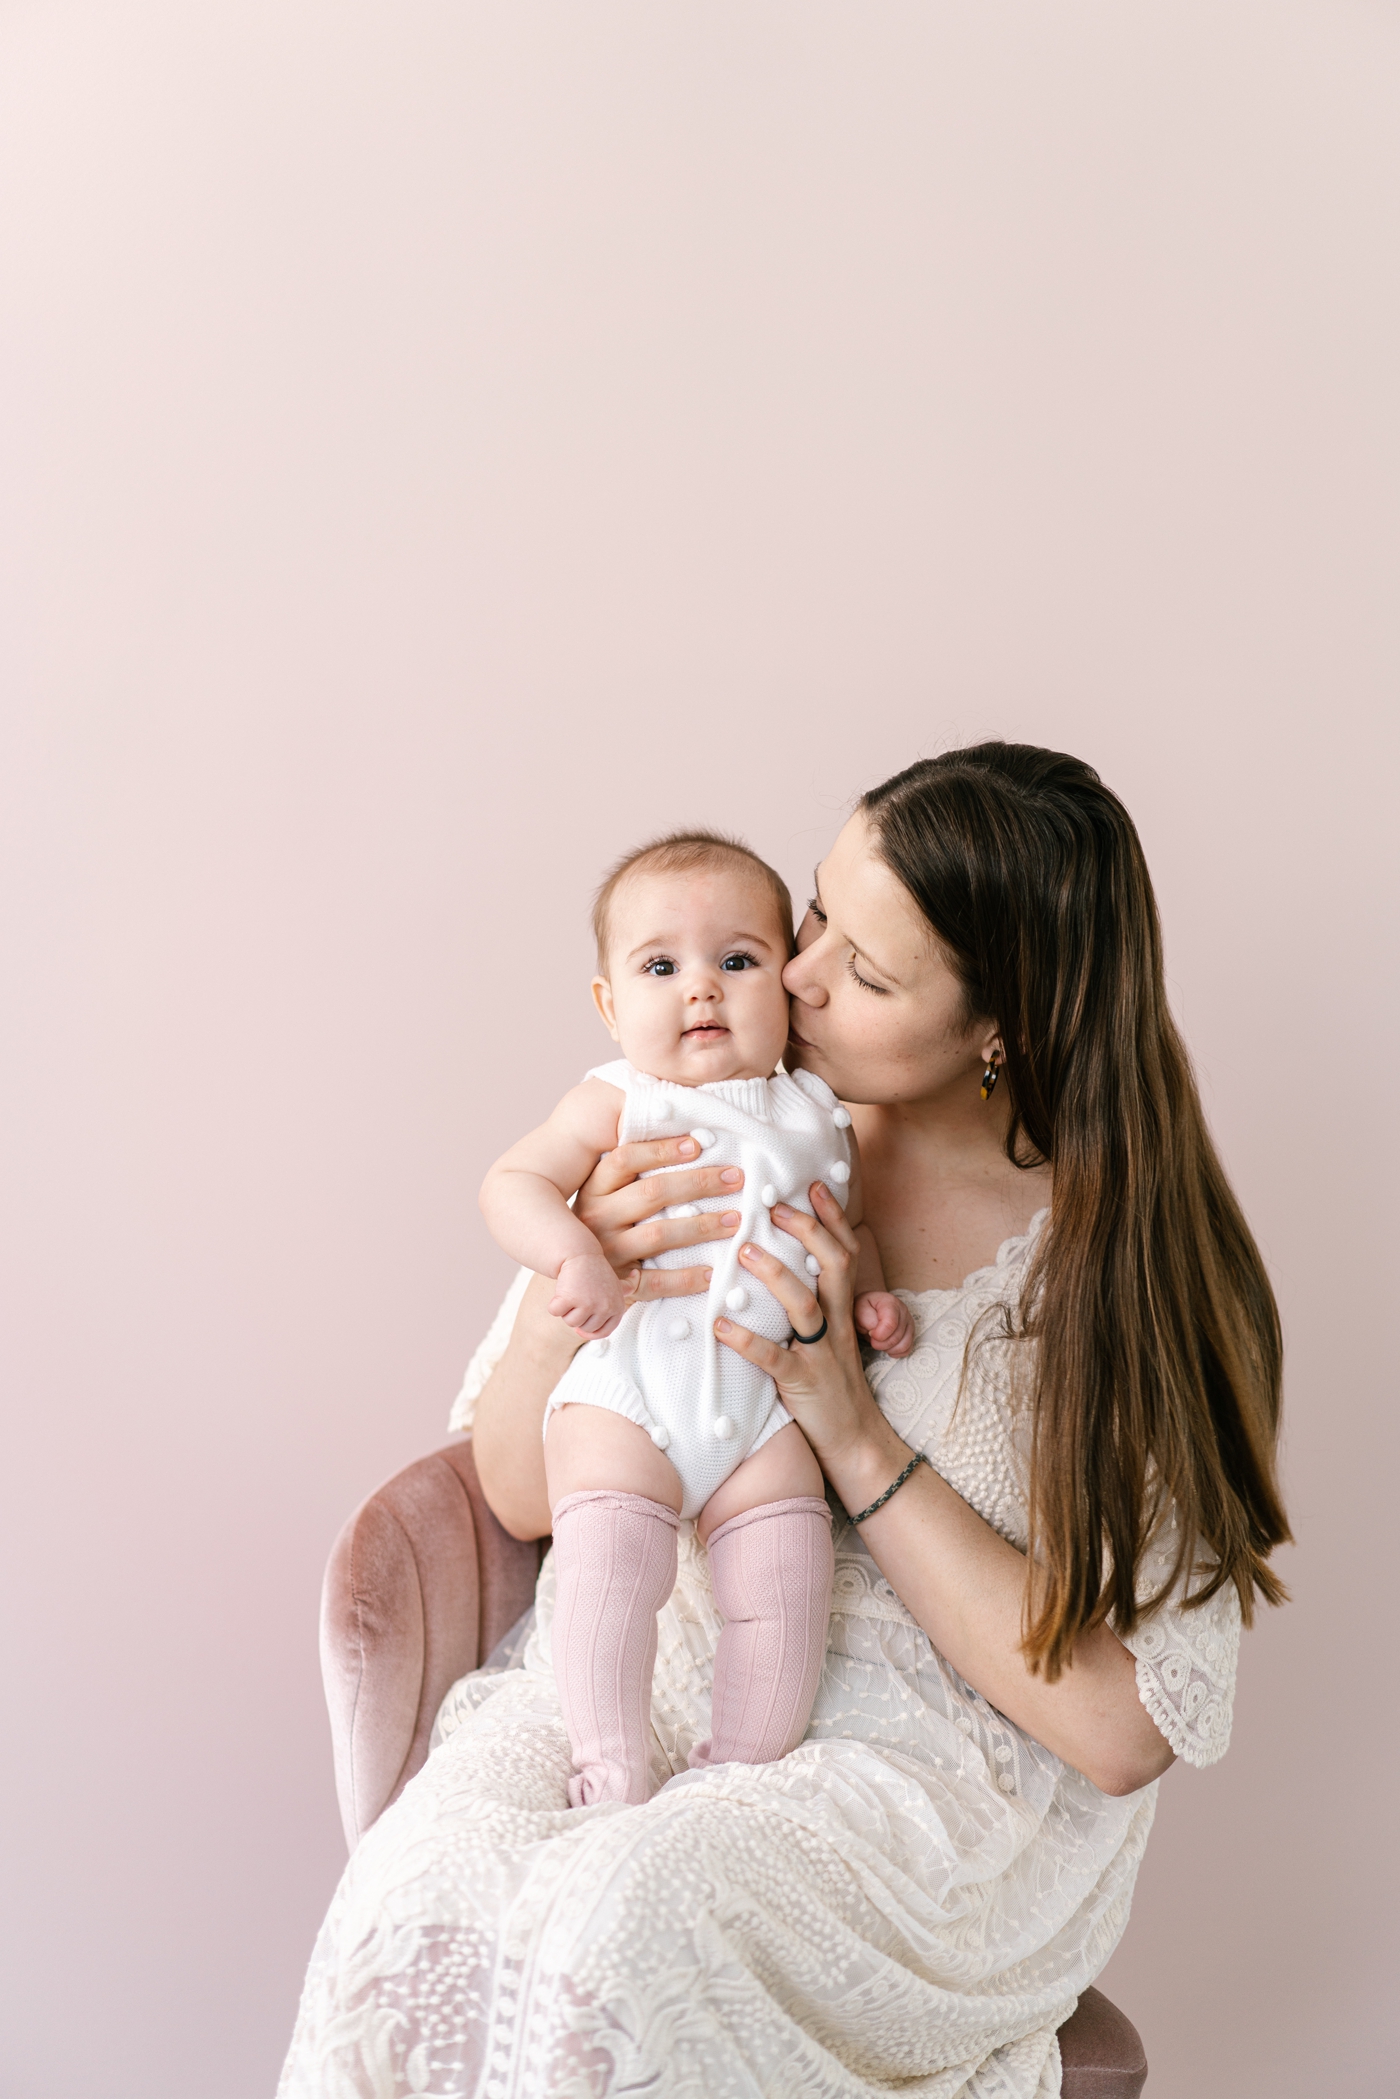 Mom kissing baby's cheek in front of pink backdrop. Photo by Lauren Sosler Photography.